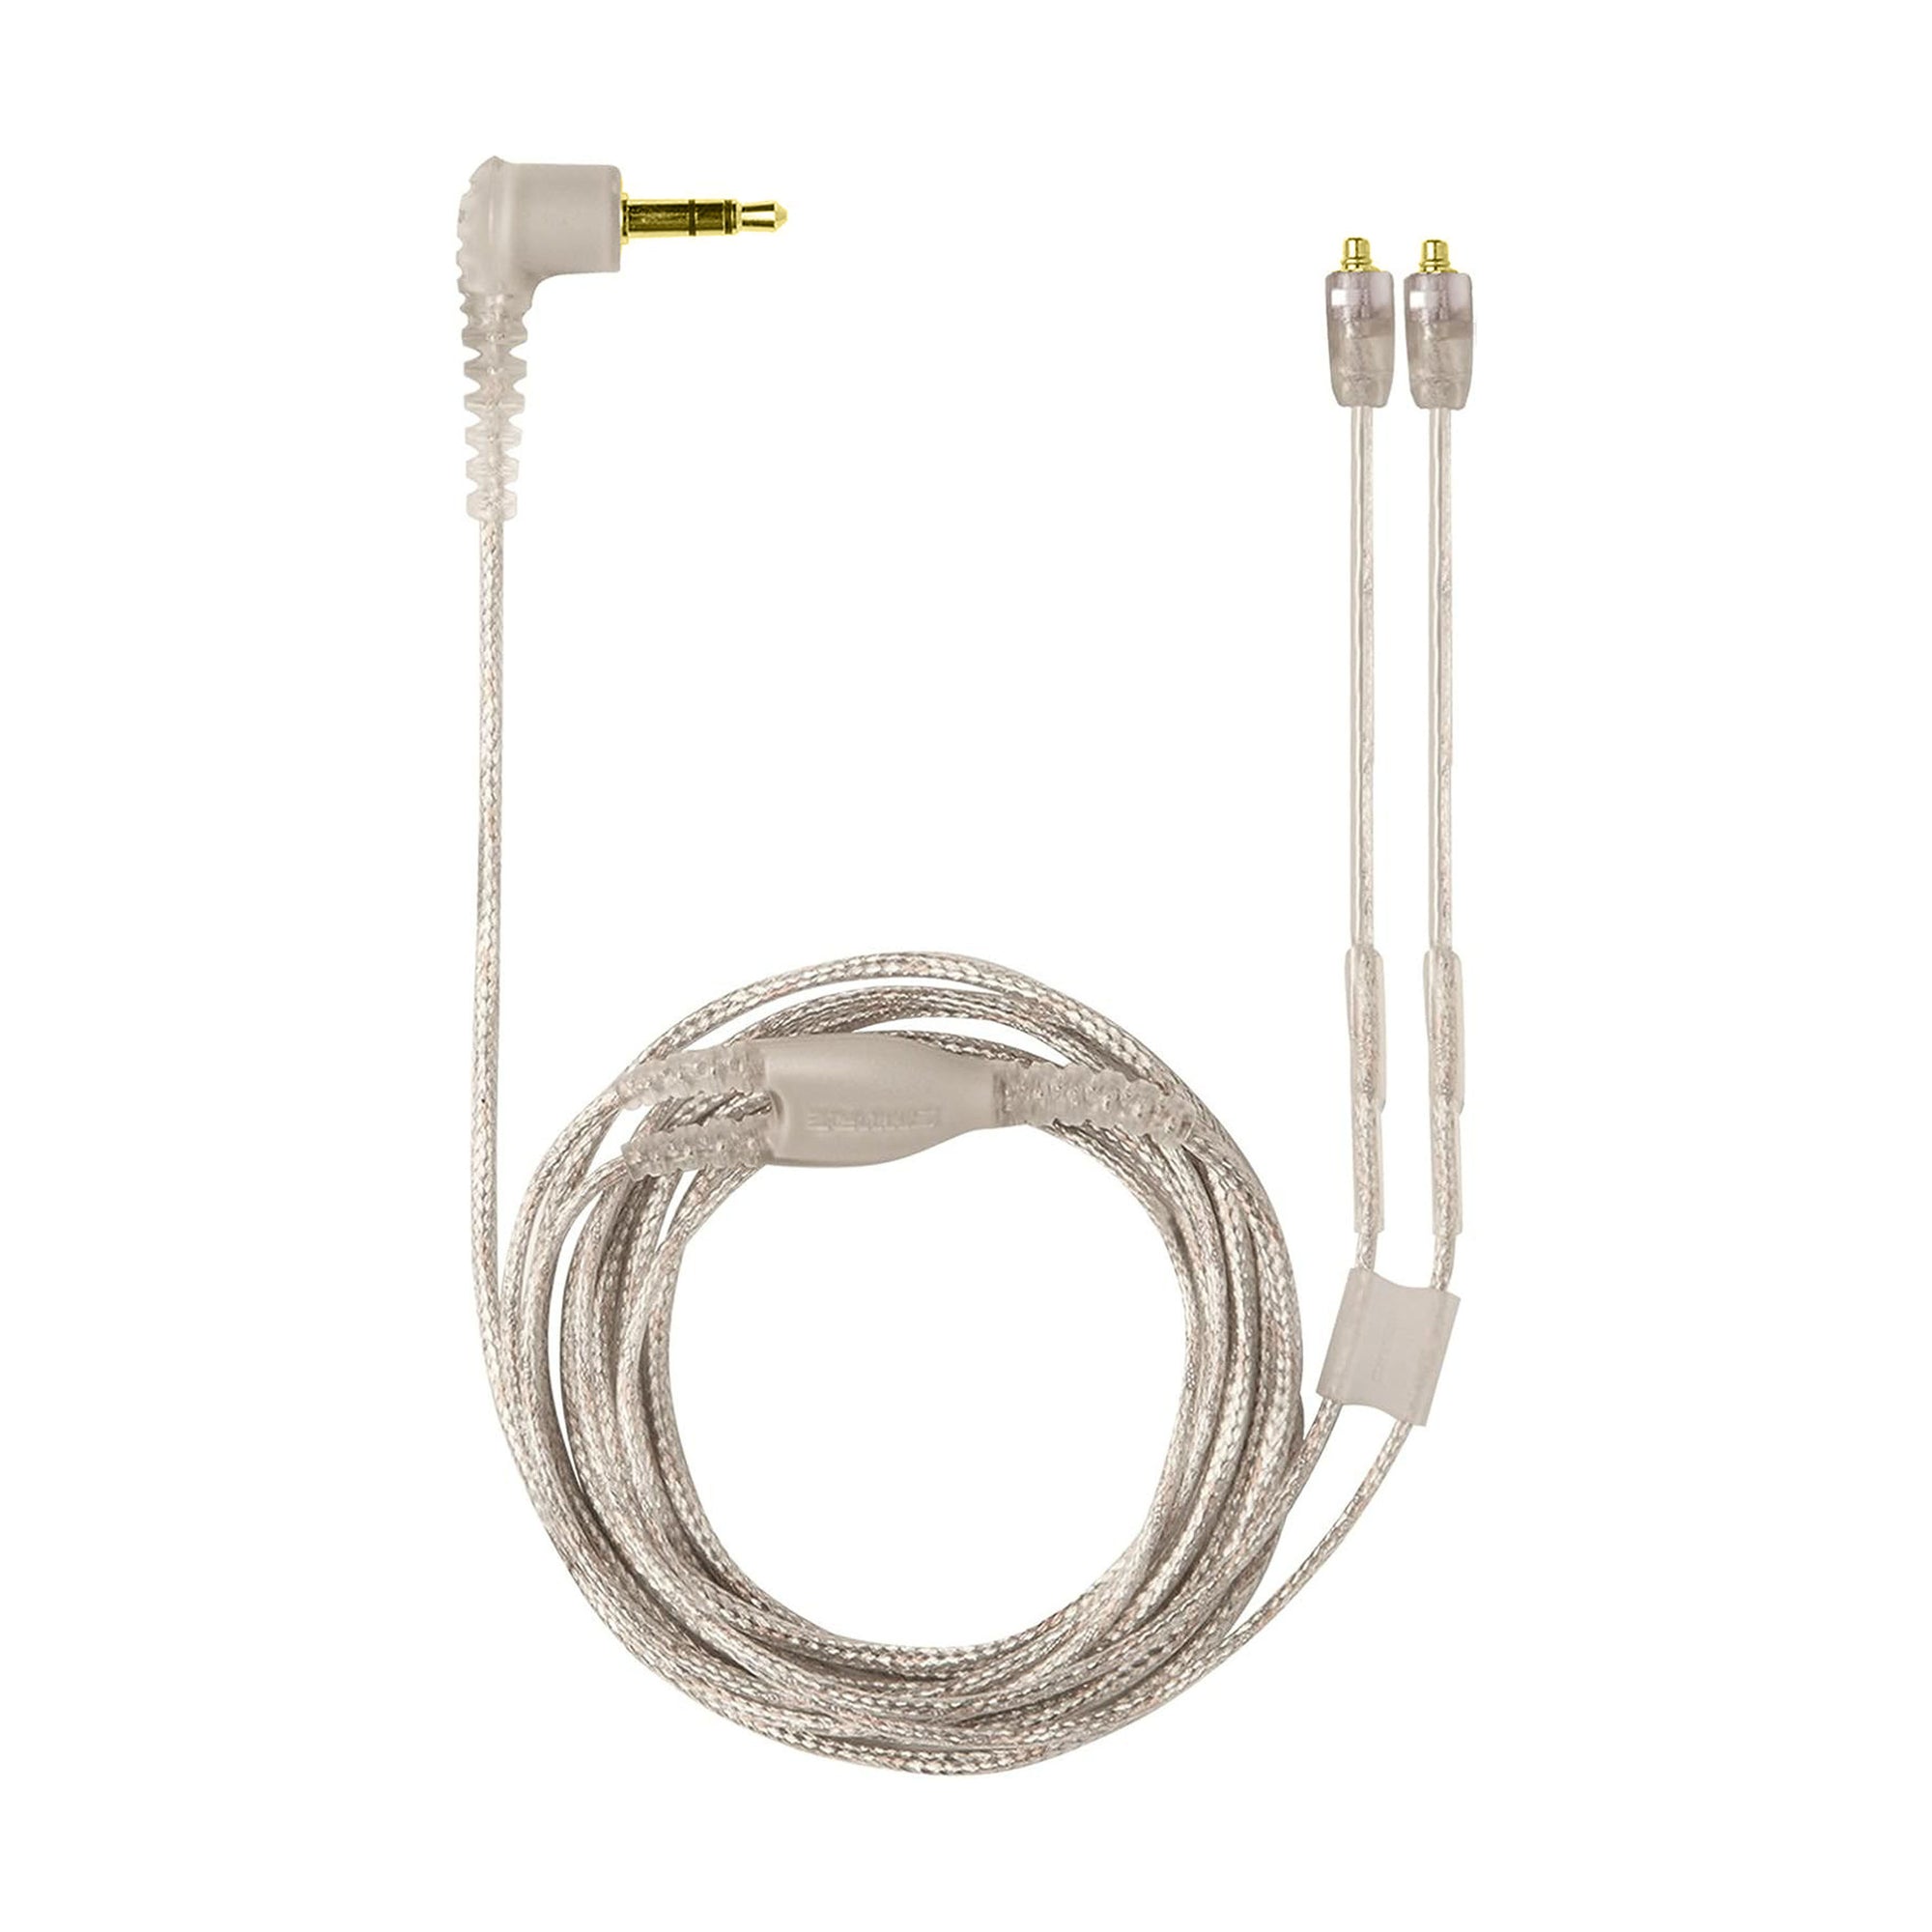 Replacement Cable for Shure SE215, SE315, SE425, SE535 & SE846 Earphones, Silver Clear Wire, 3.5mm With MMCX Connectors - 1.6M / 62”